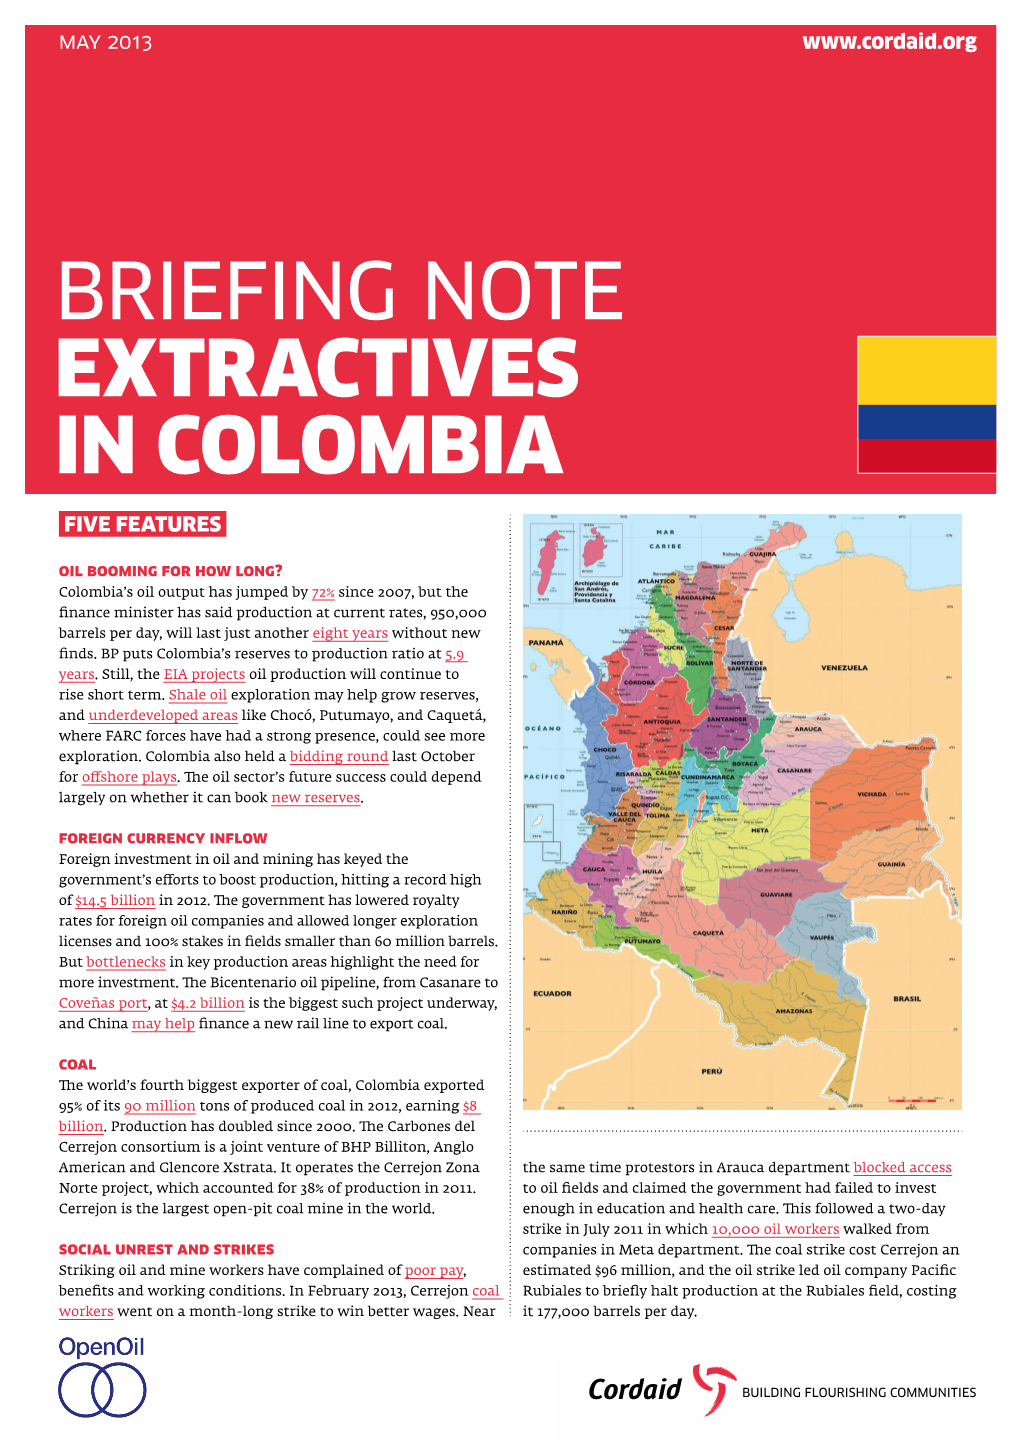 Briefing Note Extractives in Colombia